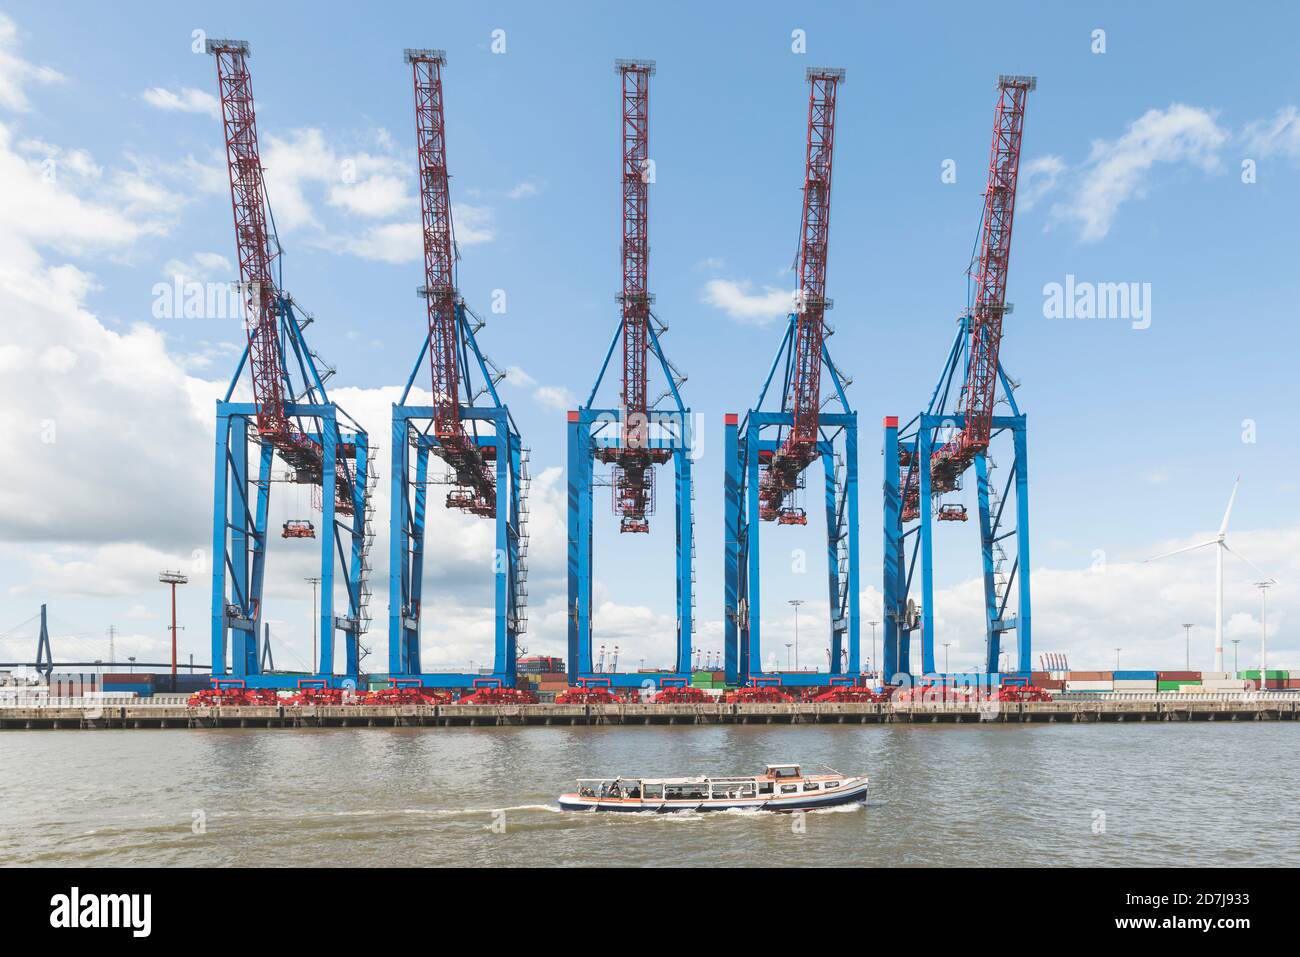 Germany, Hamburg, Barge on river Elbe with dock cranes in background Stock Photo